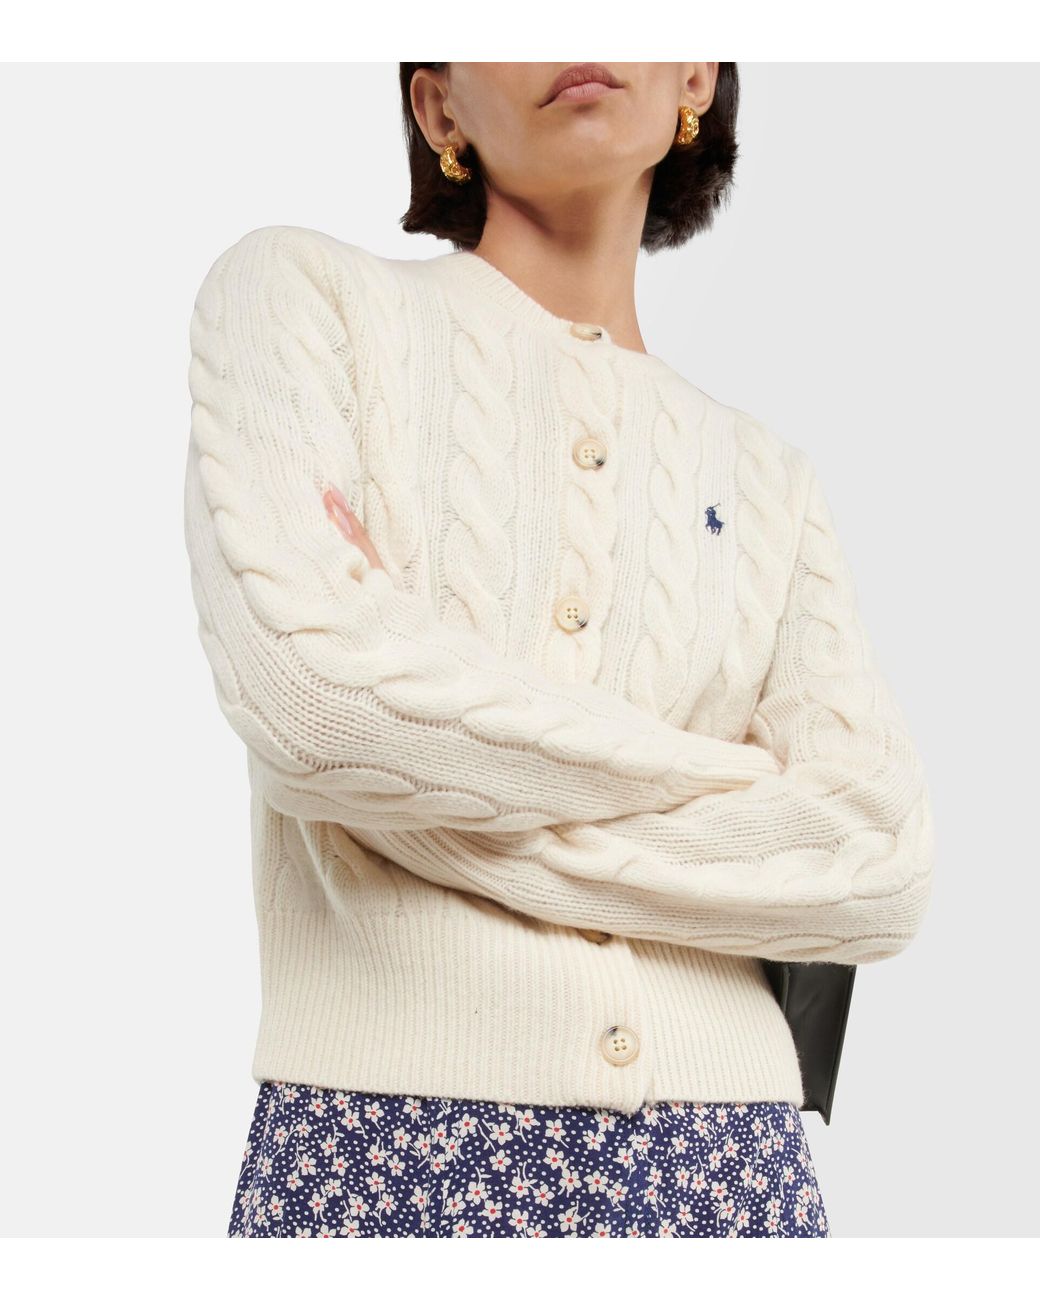 City flower anger Miss cable knit wool cashmere cardigan passionate ...